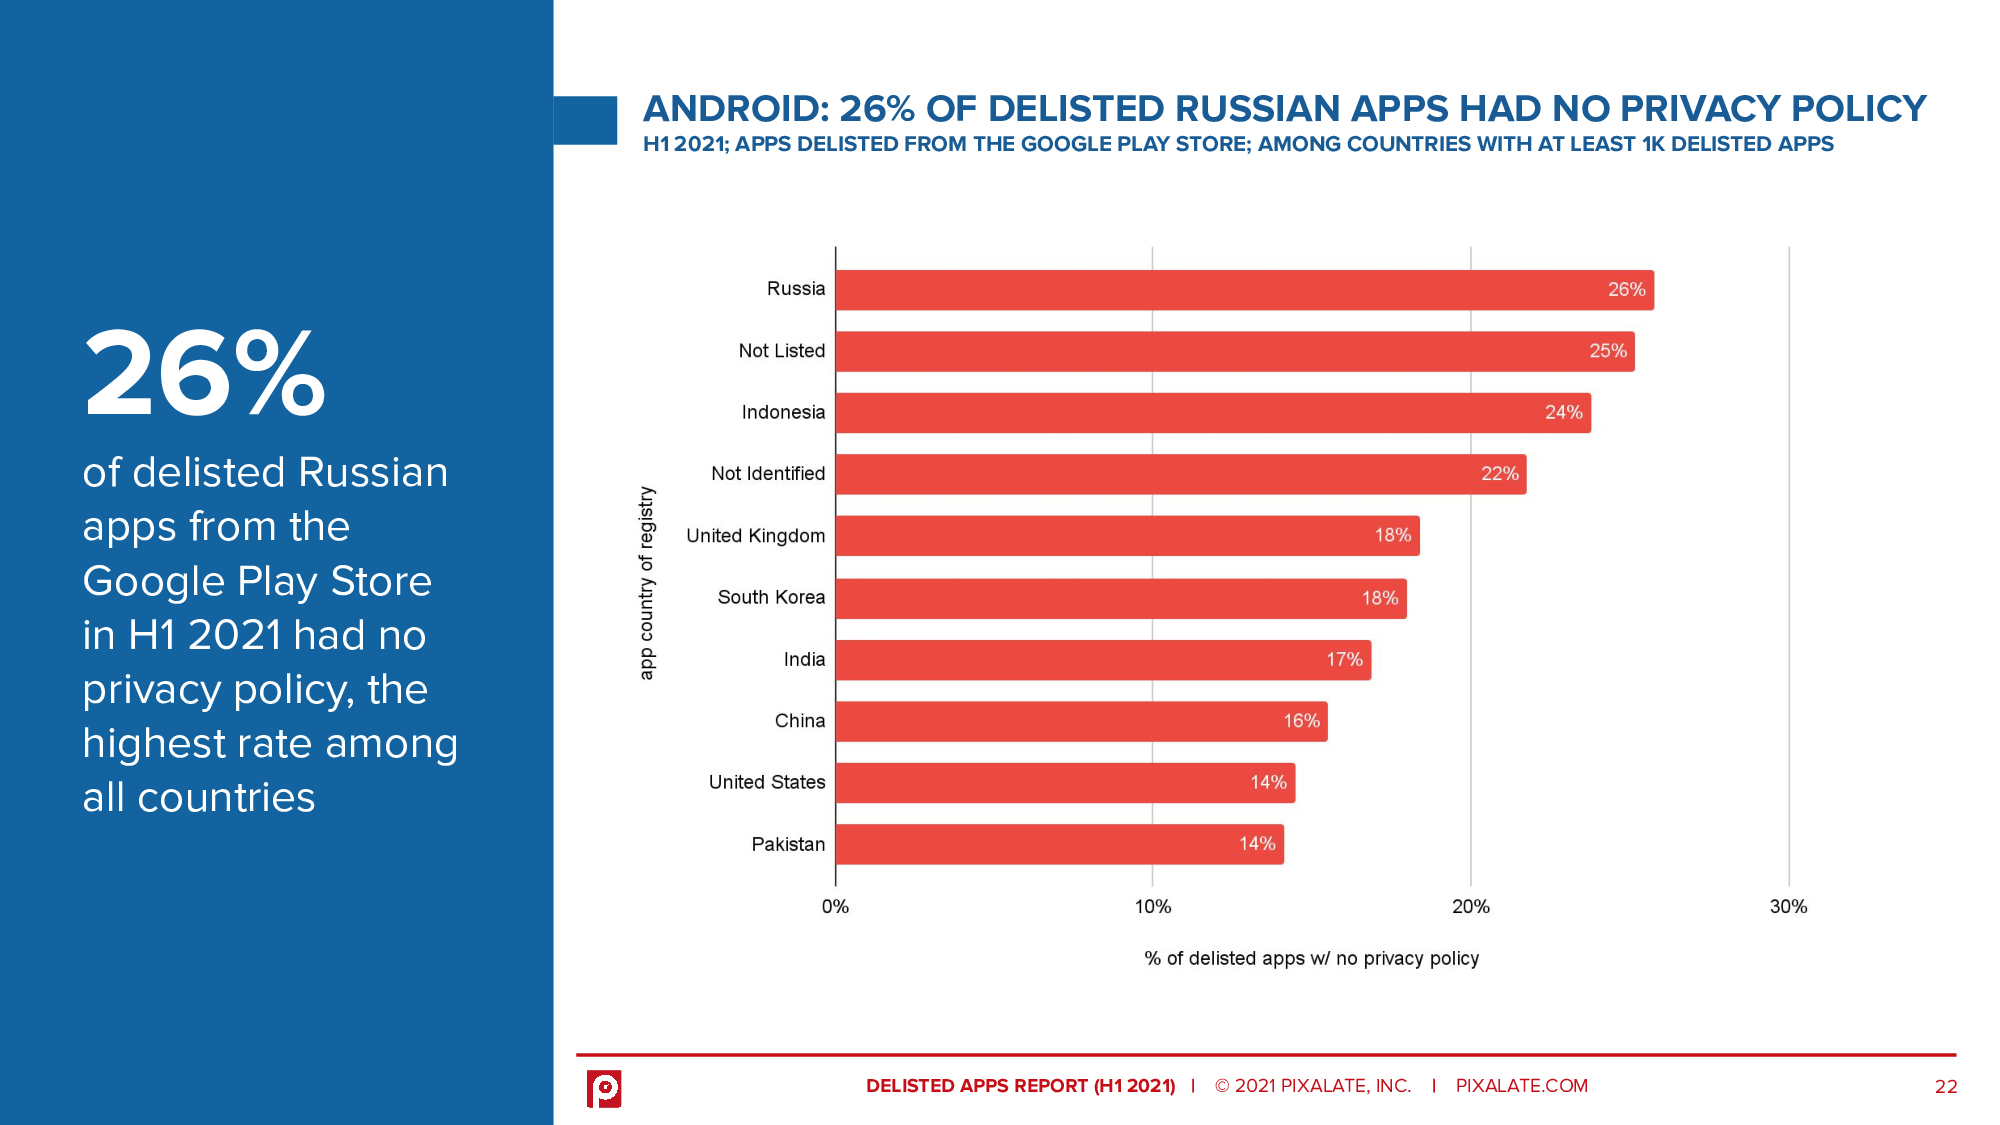 26% of delisted Russian apps from the Google Play Store in H1 2021 had no privacy policy, the highest rate among all countries